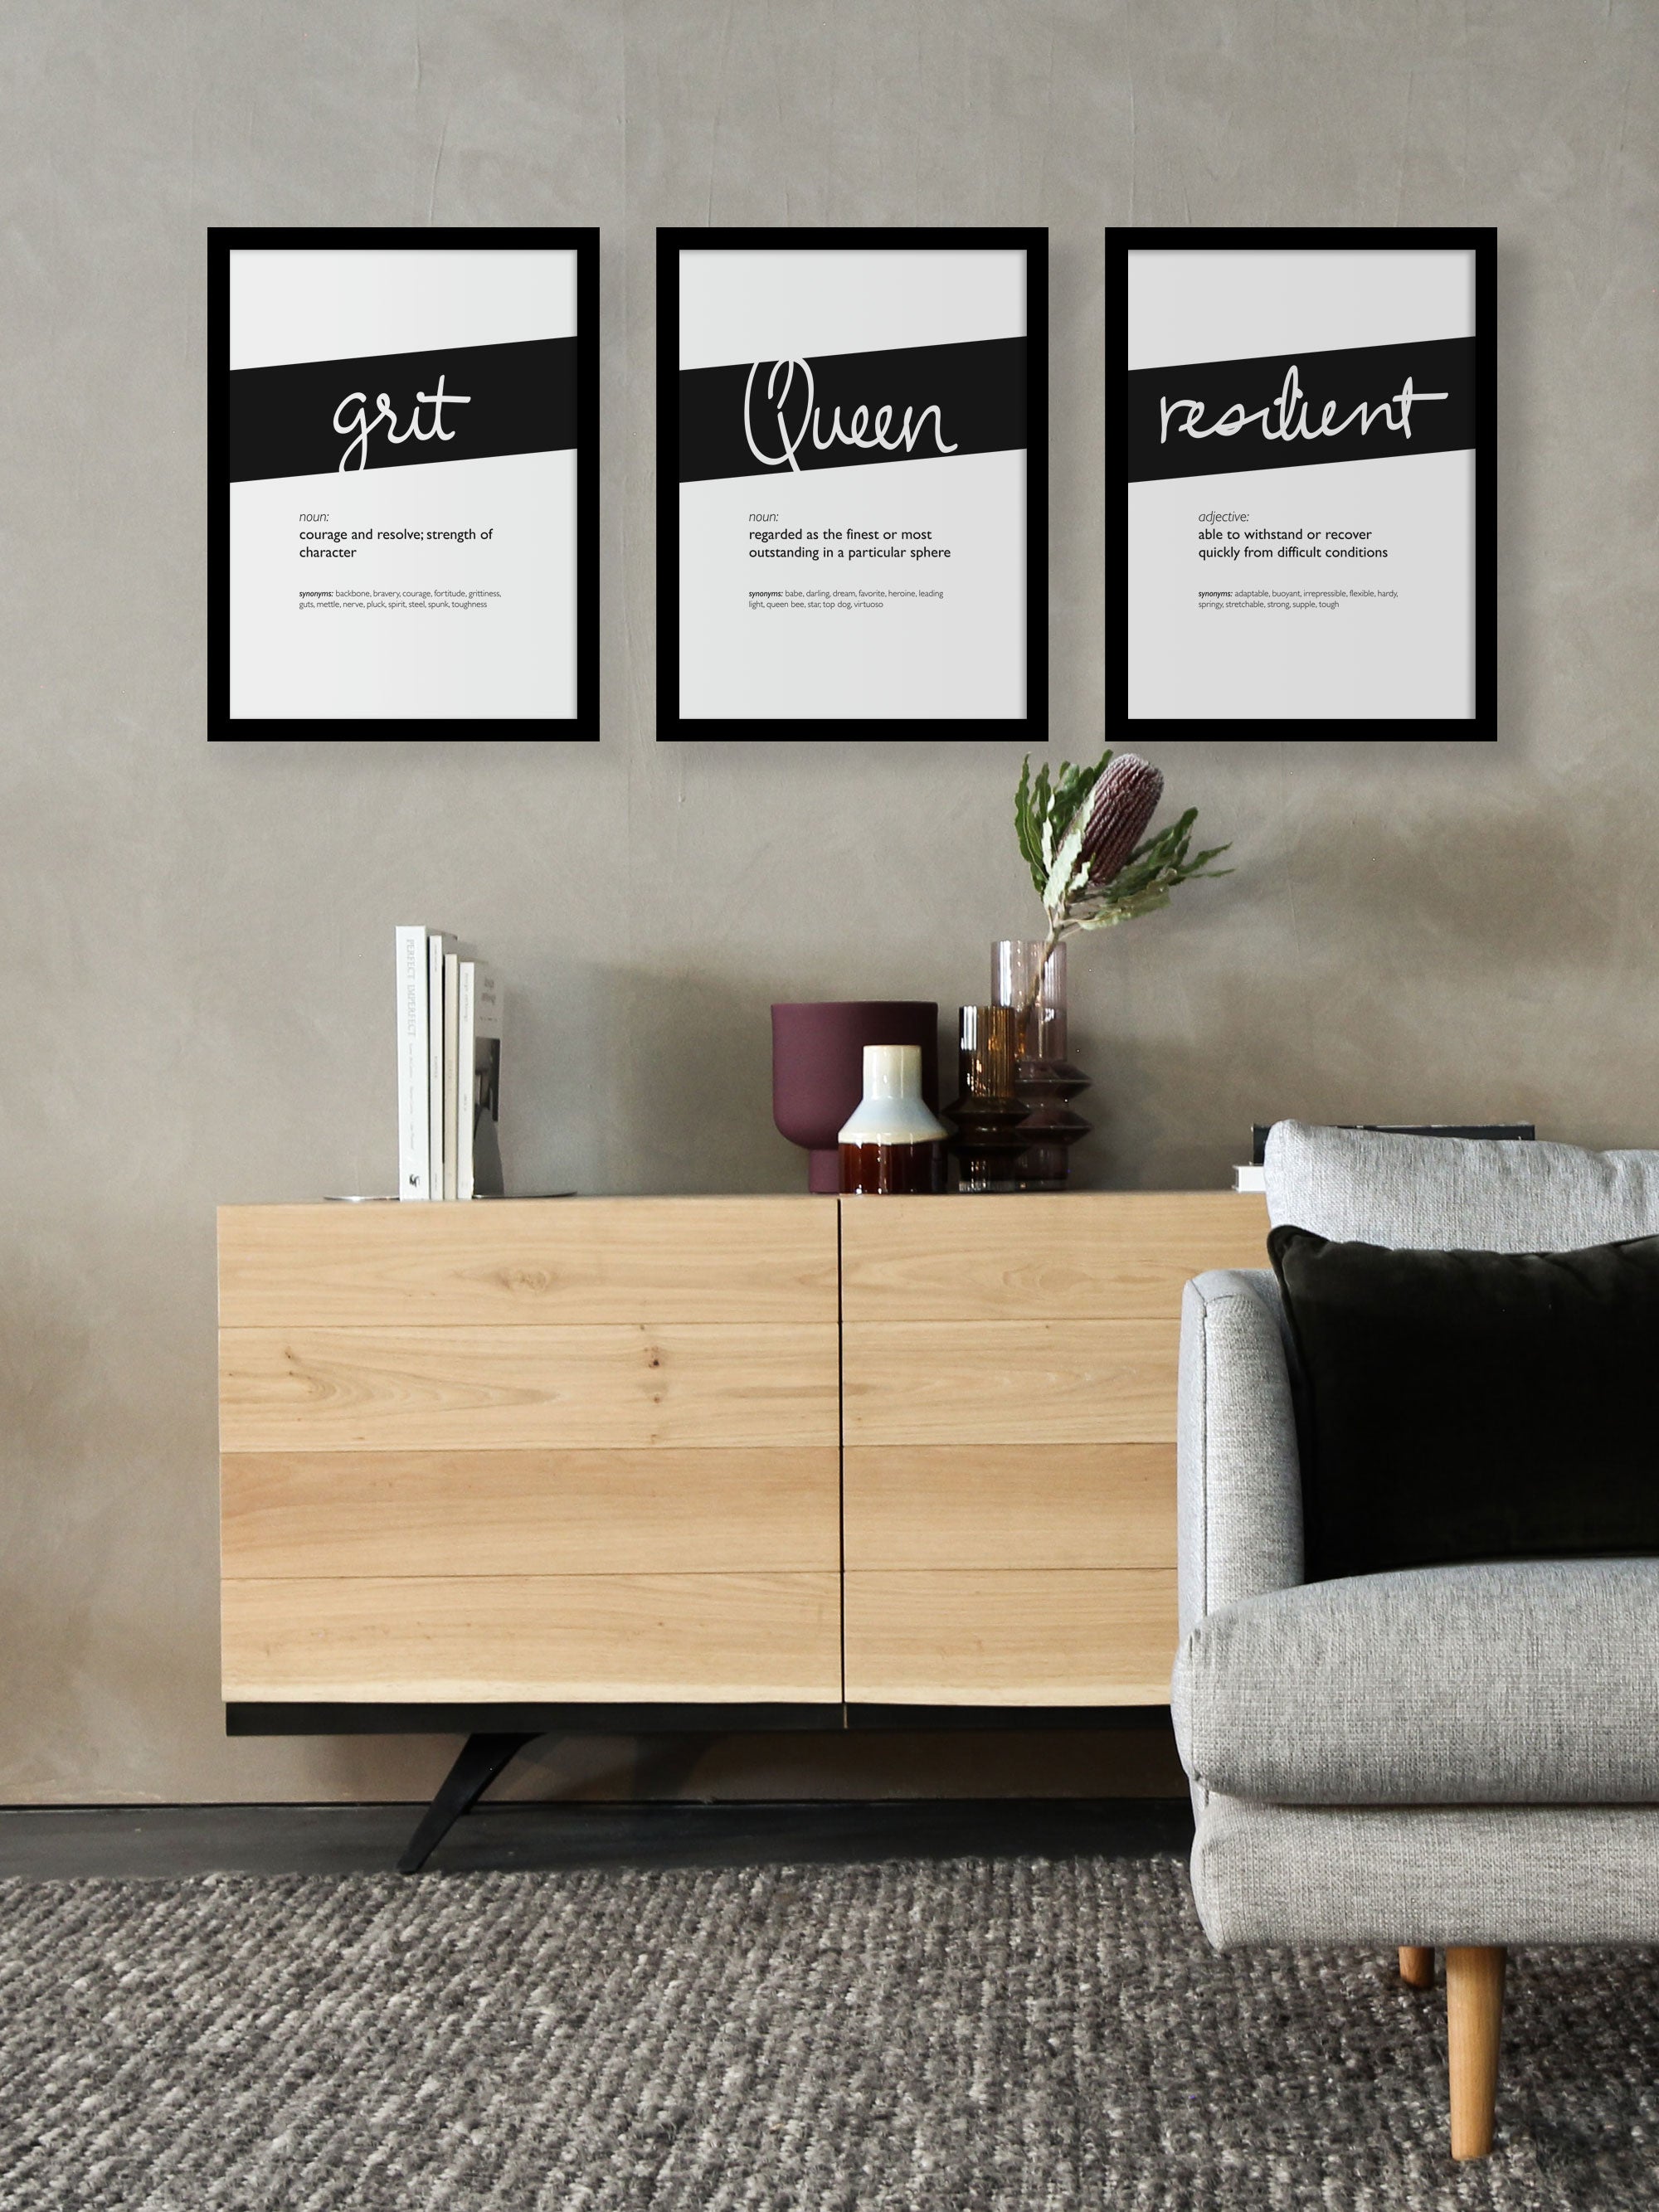 Framed Black Queen Print With Word Definition - High Quality, Affordable, Hand Written, Empowering, Self Love, Mantra Word Print. Archival-Quality, Matte Giclée Print - Brevity Jewelry